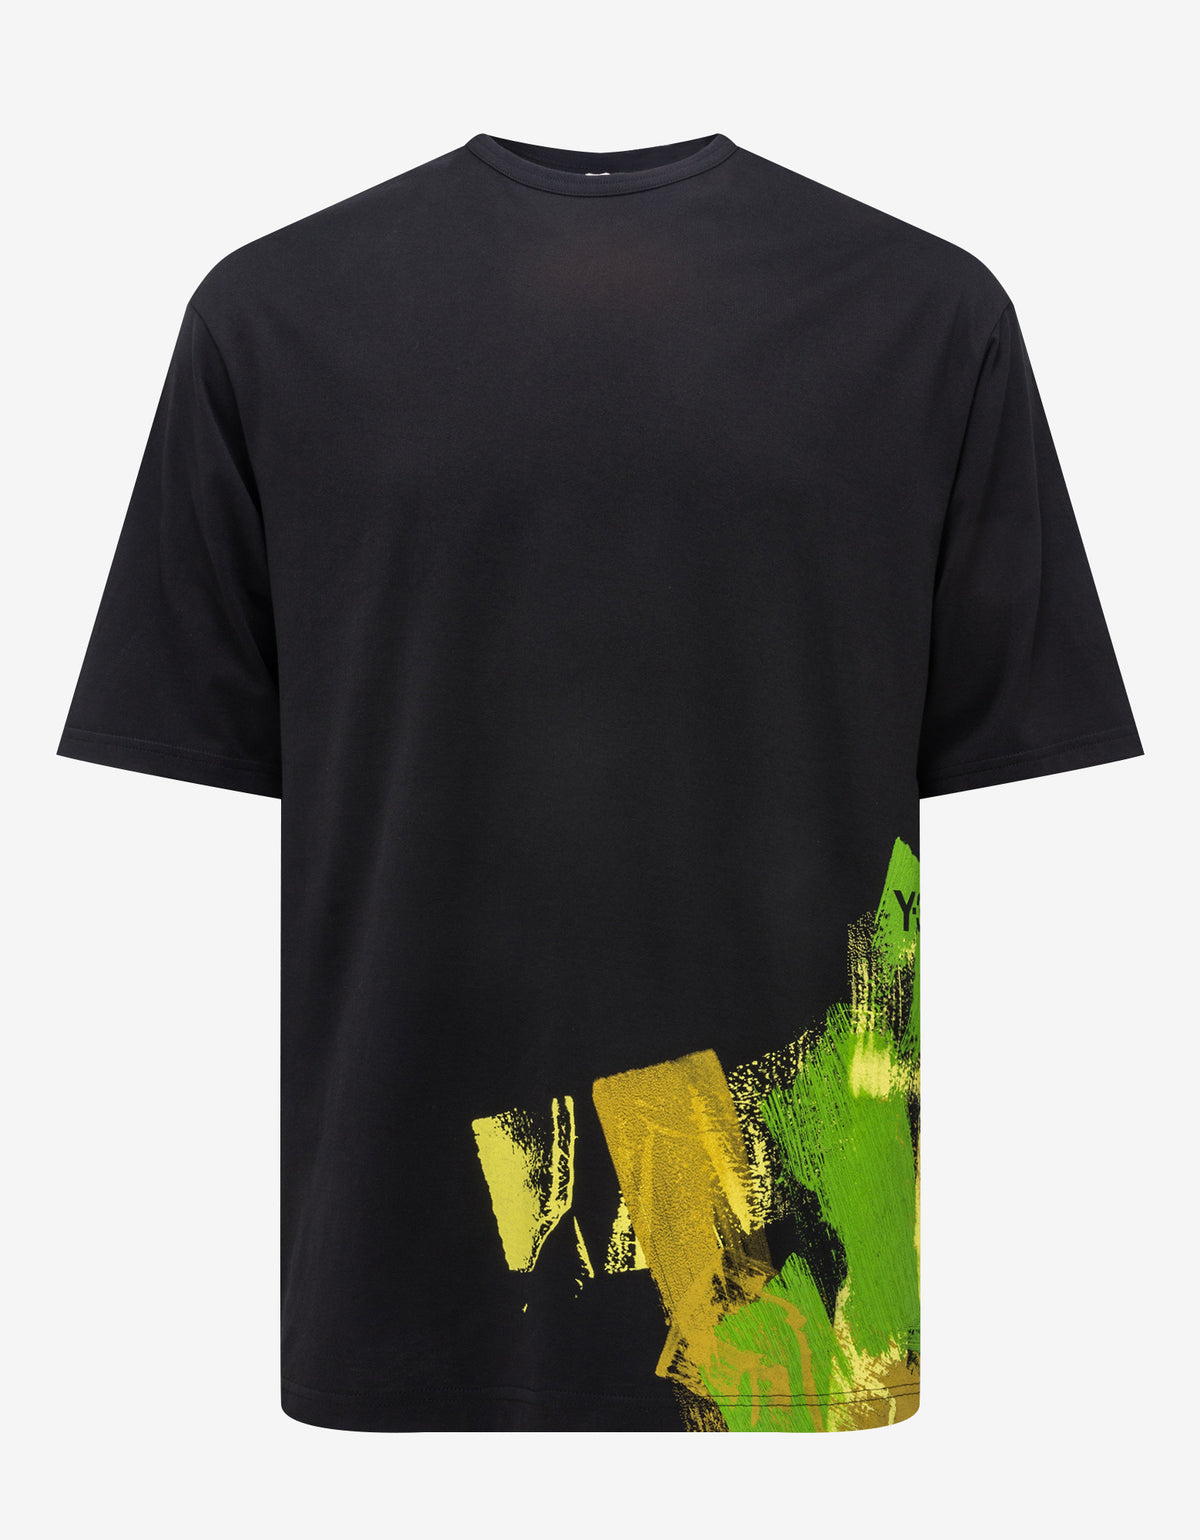 Y-3 Black Placed Graphic T-Shirt